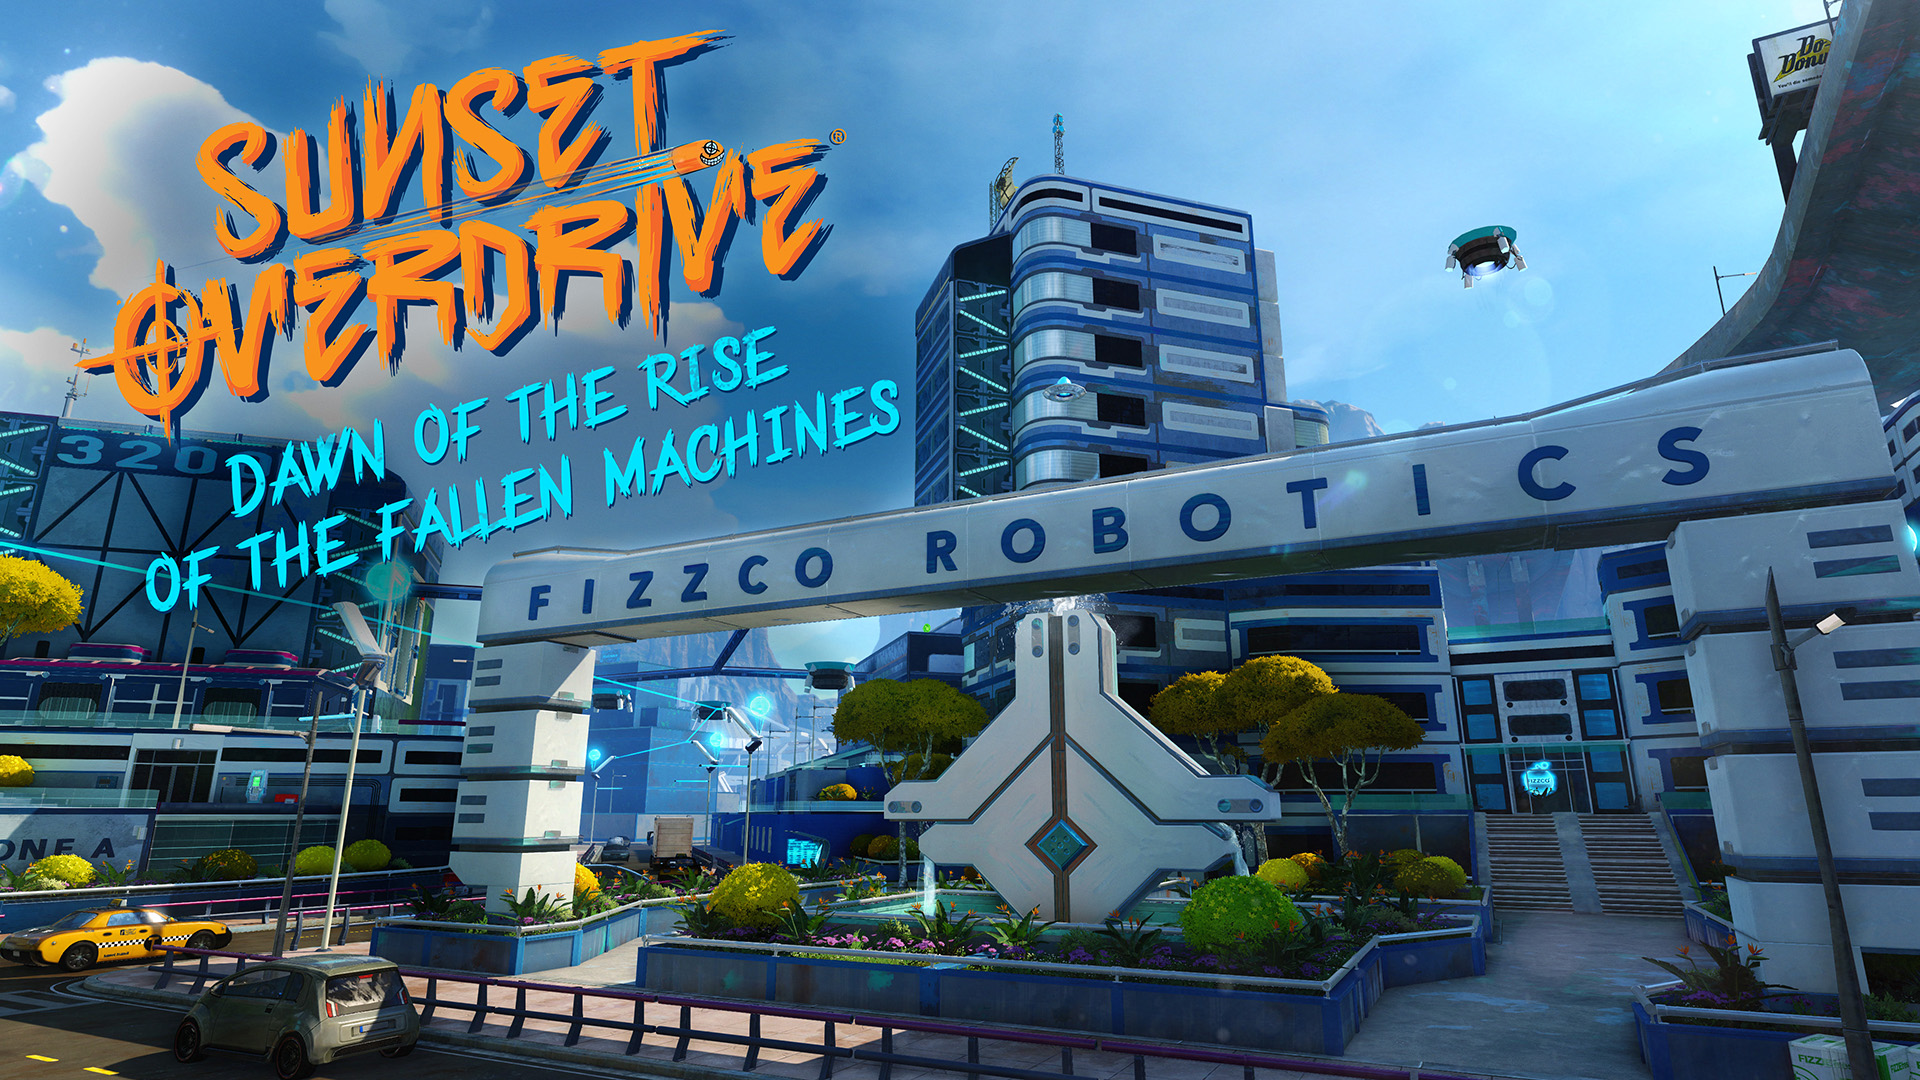 Sunset Overdrive Available to Pre-Load on Xbox One Starting Today